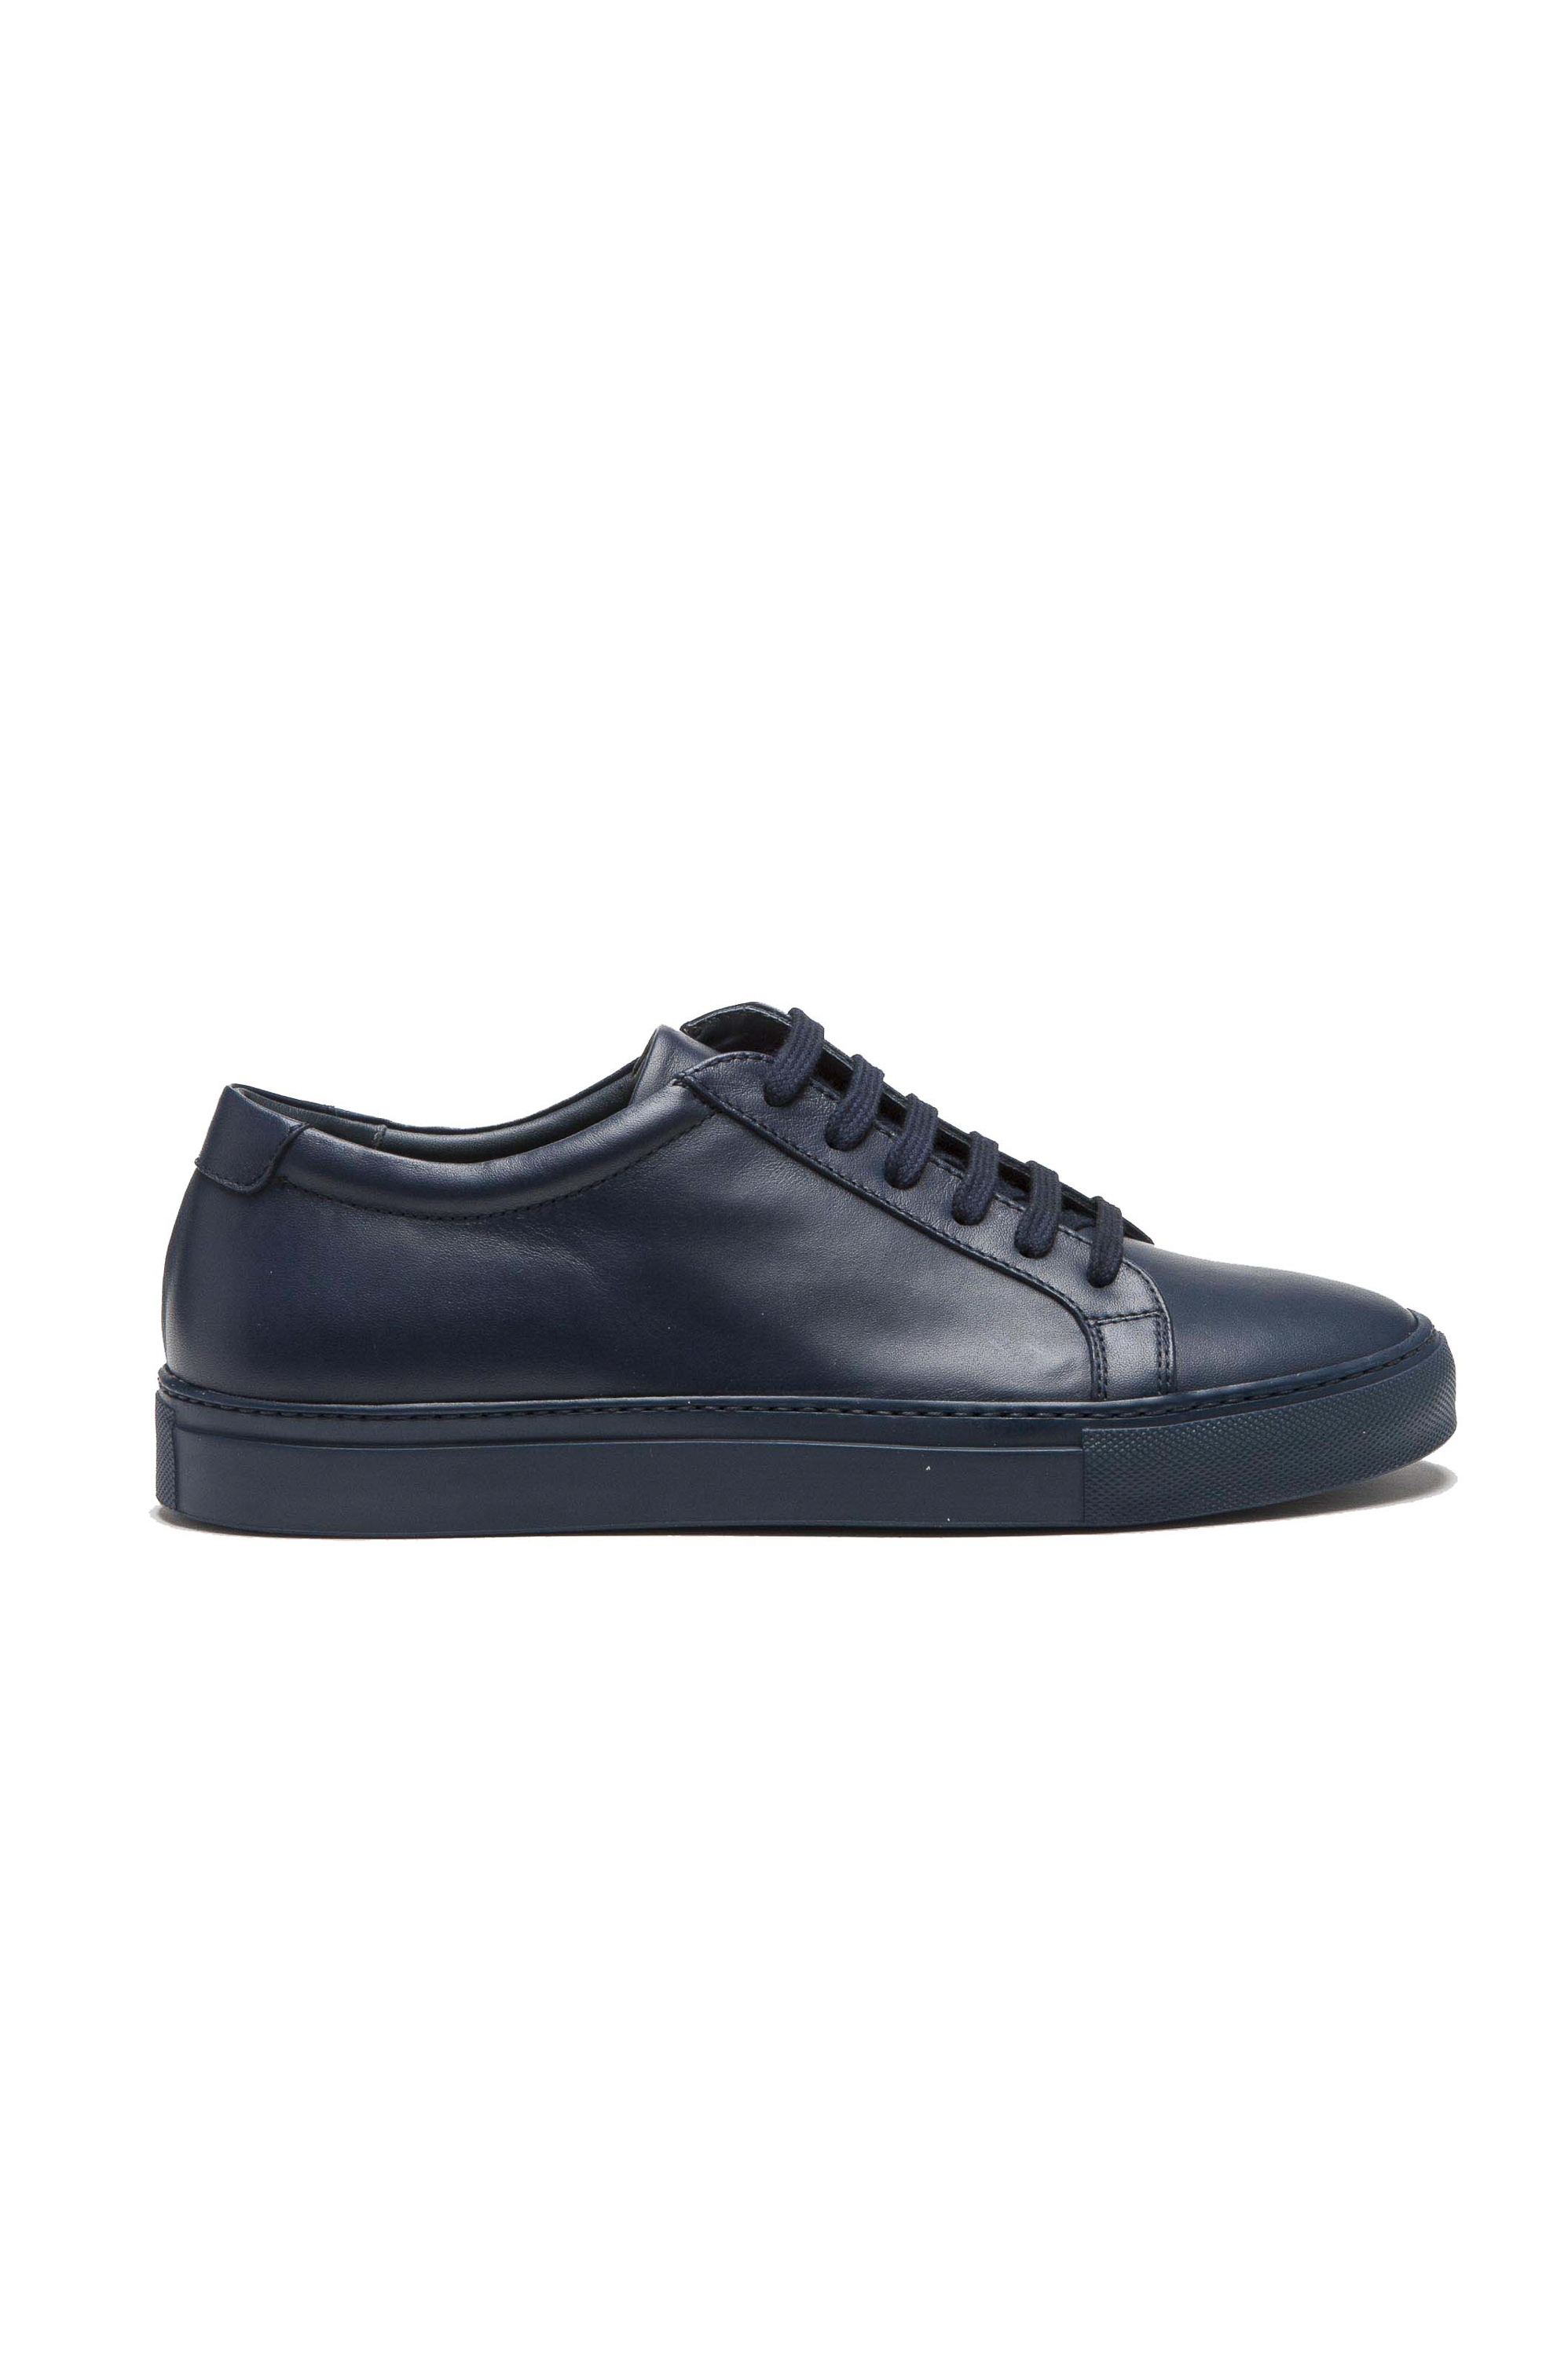 SBU 01525_19AW Classic lace up sneakers in blue calfskin leather 01